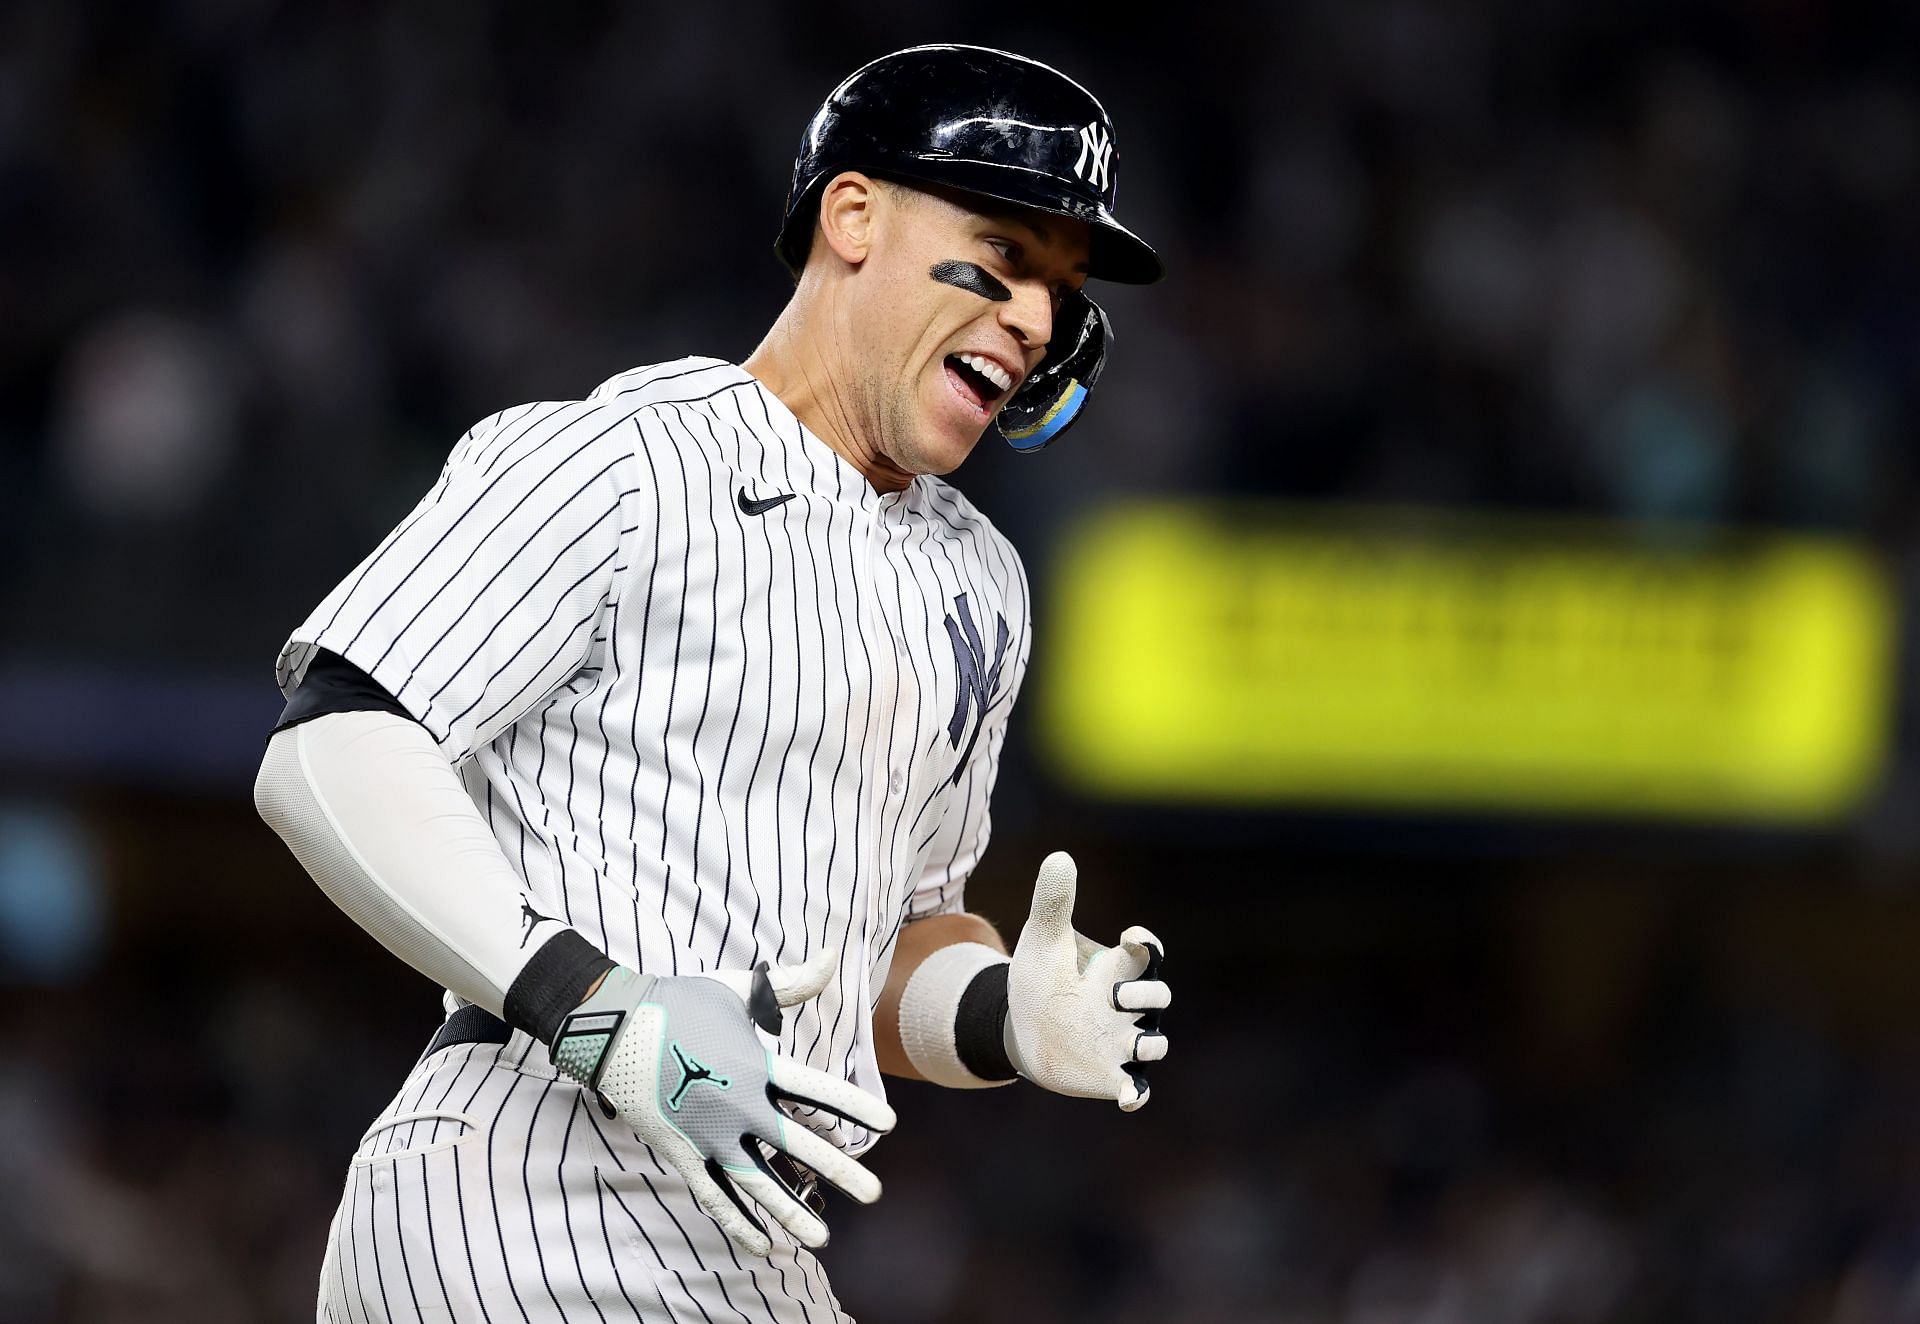 The New York Yankees bounced back